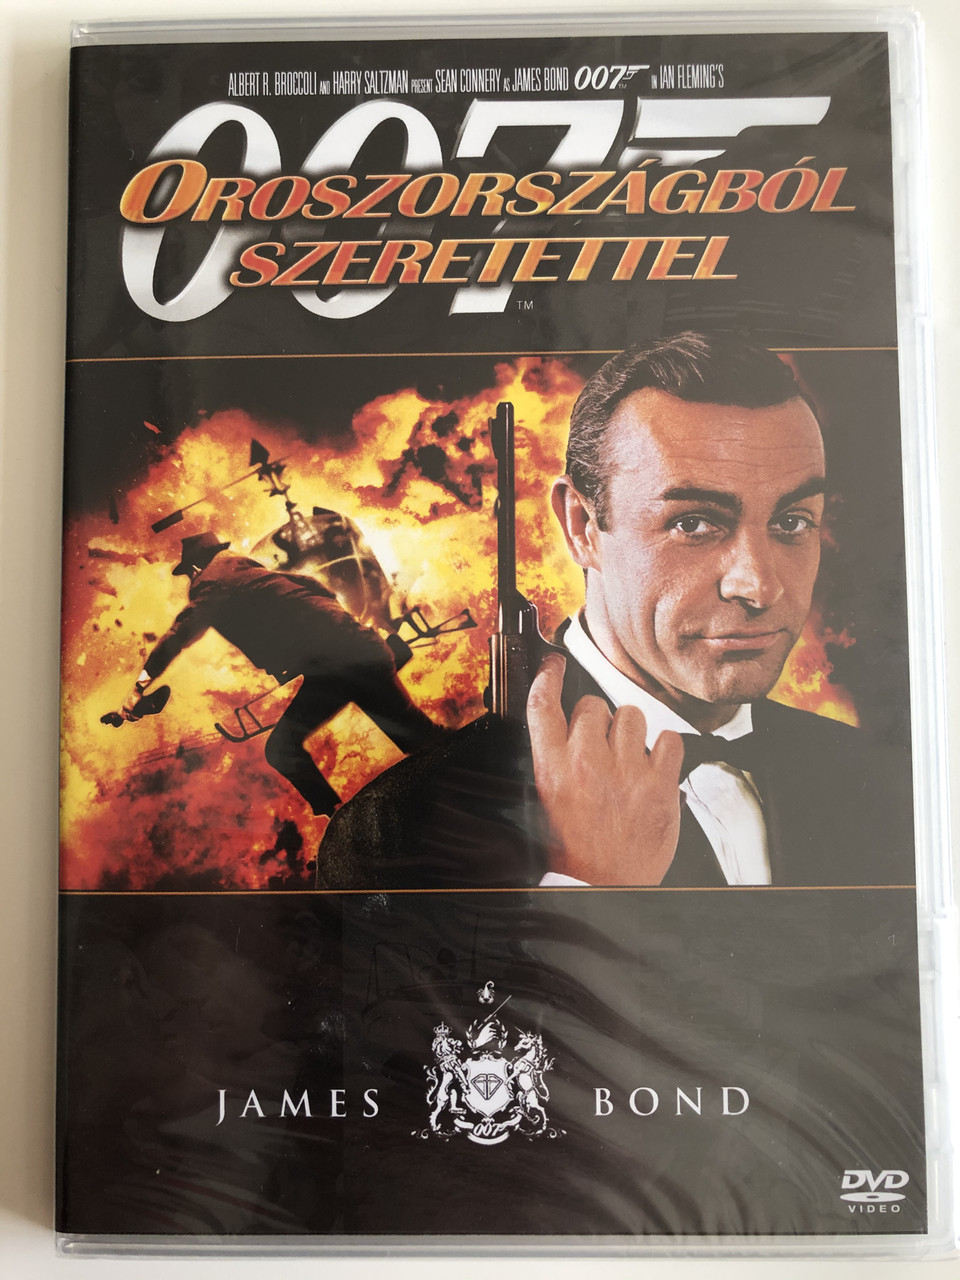 James Bond 007 - From Russia, with love DVD 1963 Oroszországból,  szeretettel / Directed by Terence Young / Starring: Sean Connery, Pedro  Armendáriz, Lotte Lenya, Robert Shaw - Bible in My Language